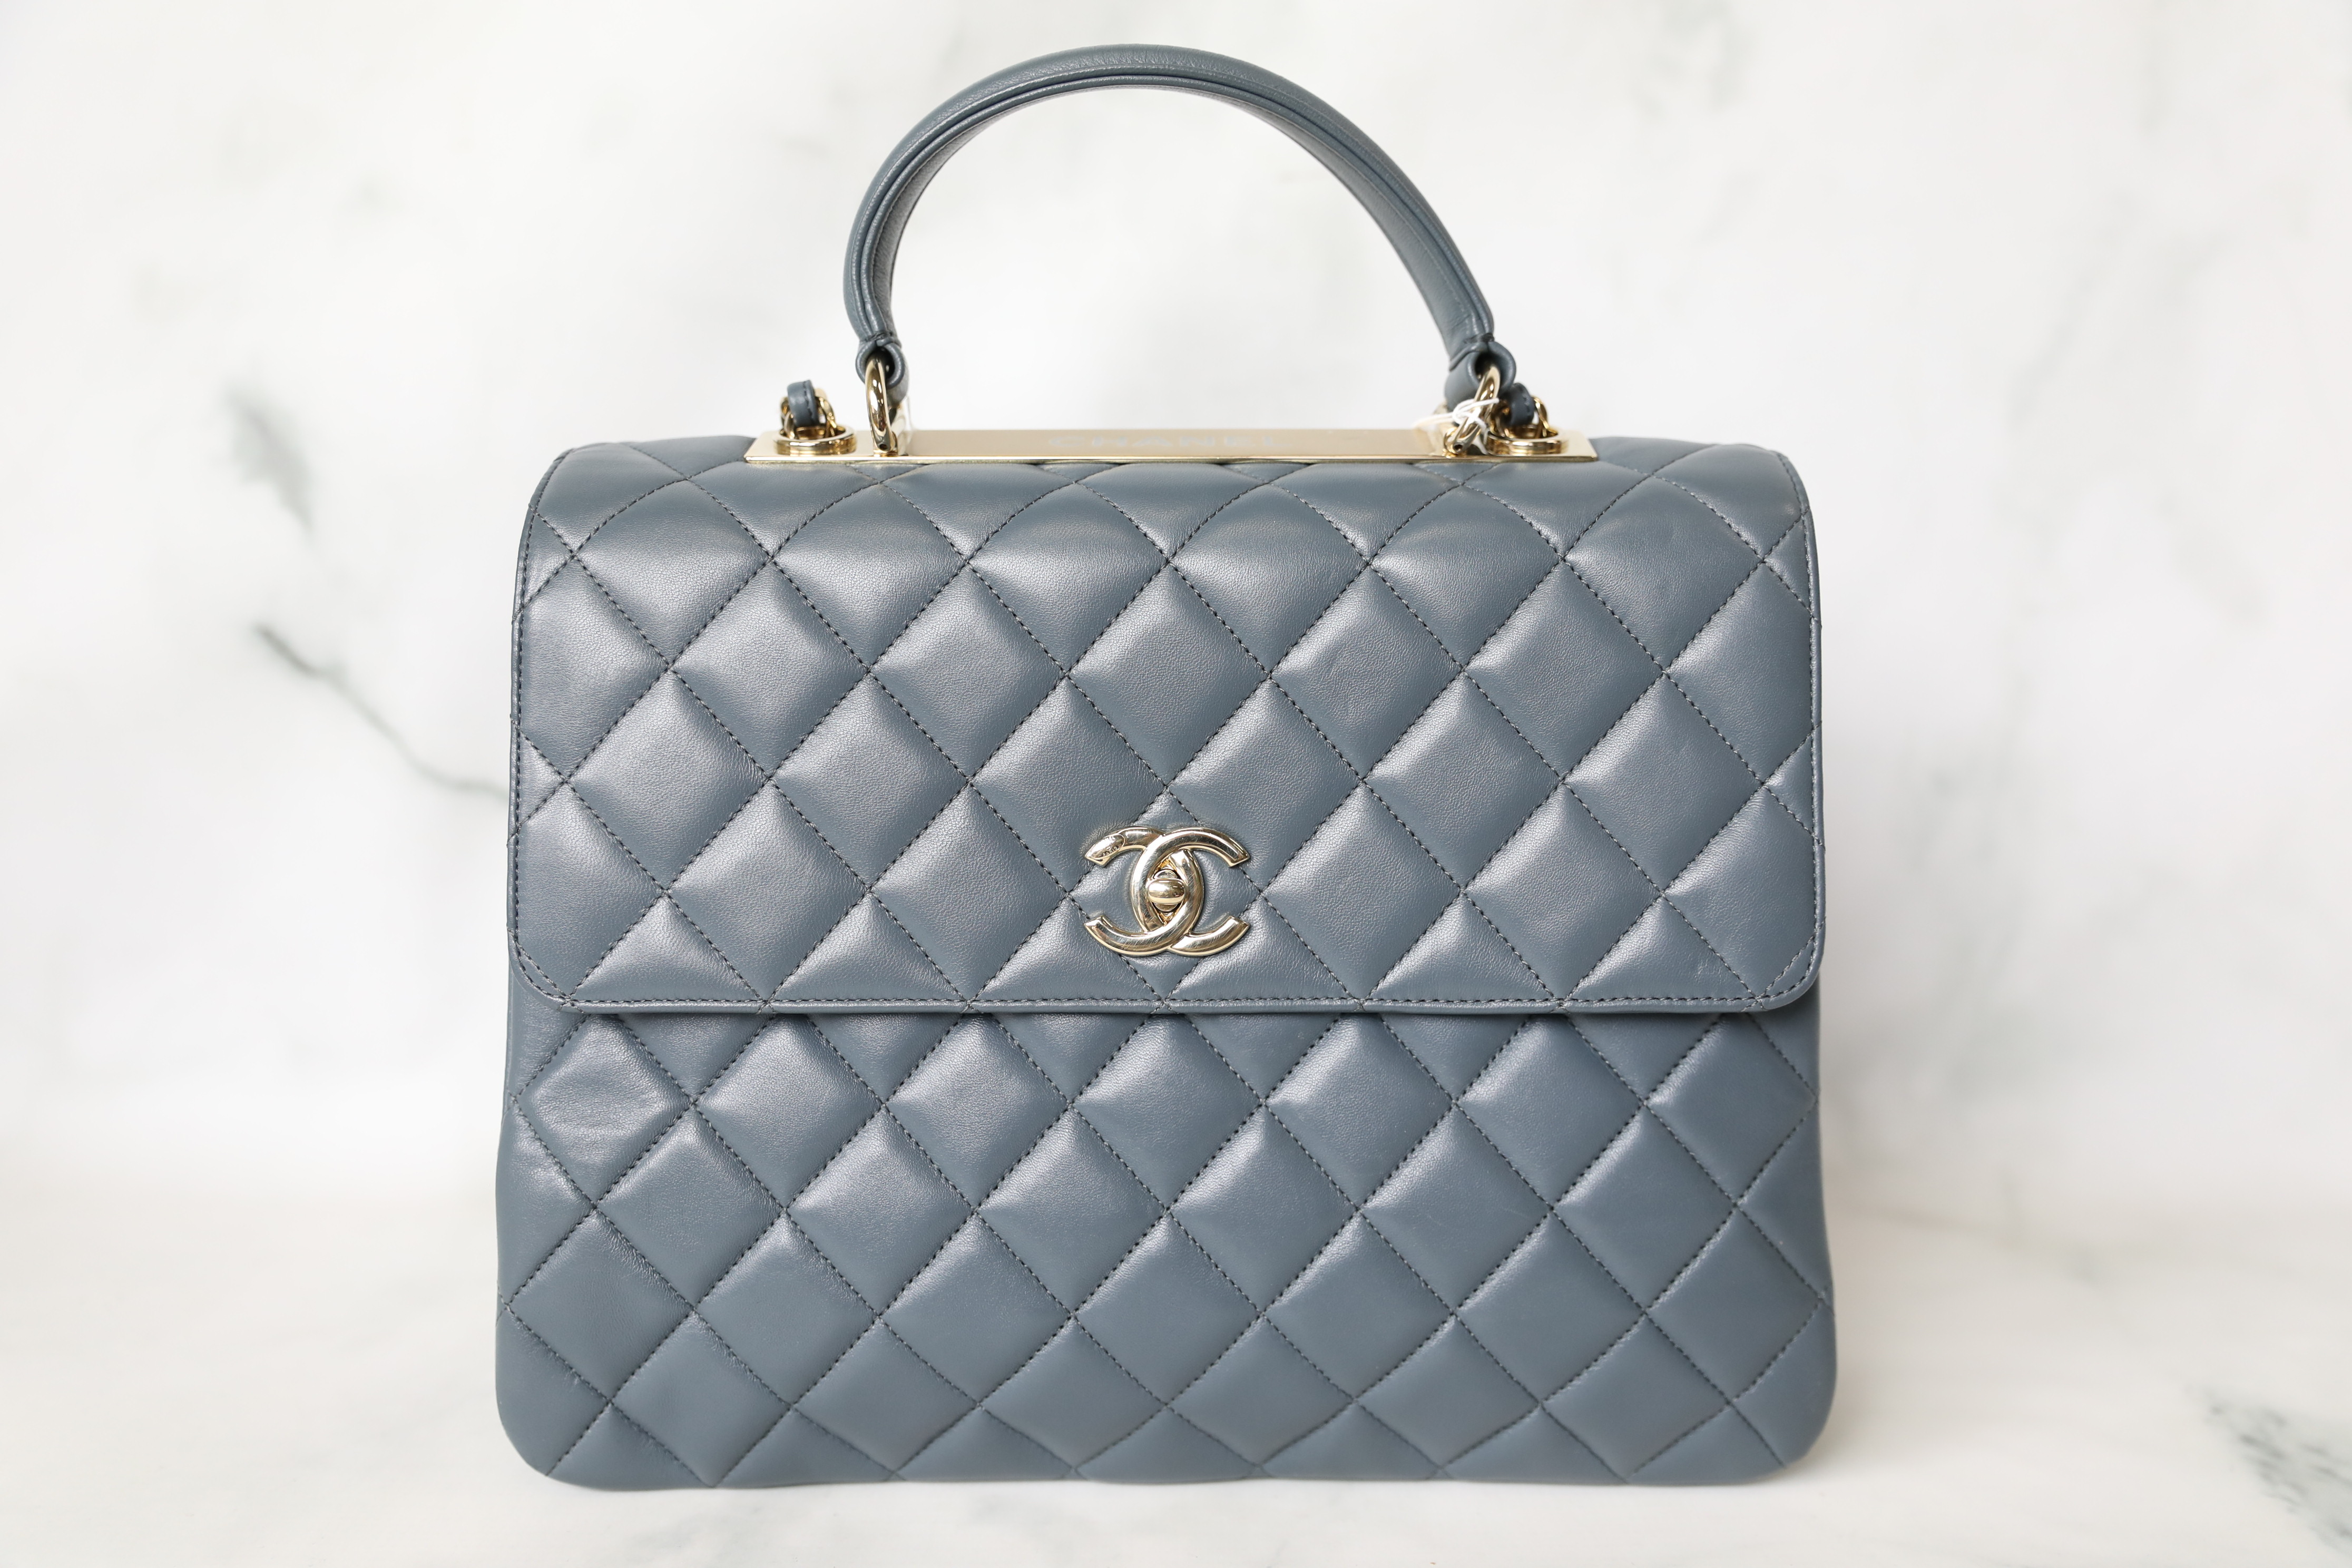 CHANEL Gray Bags & Handbags for Women, Authenticity Guaranteed